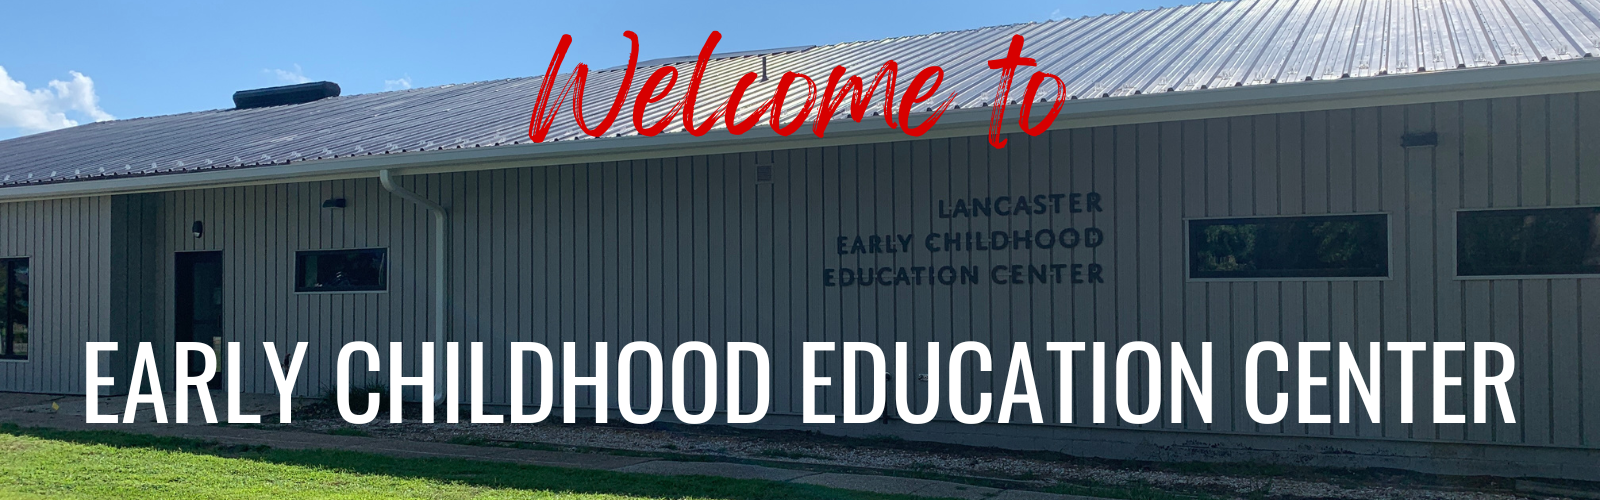 "Welcome to Lancaster Early Childhood Education Center" with a picture of the front of the ECEC building